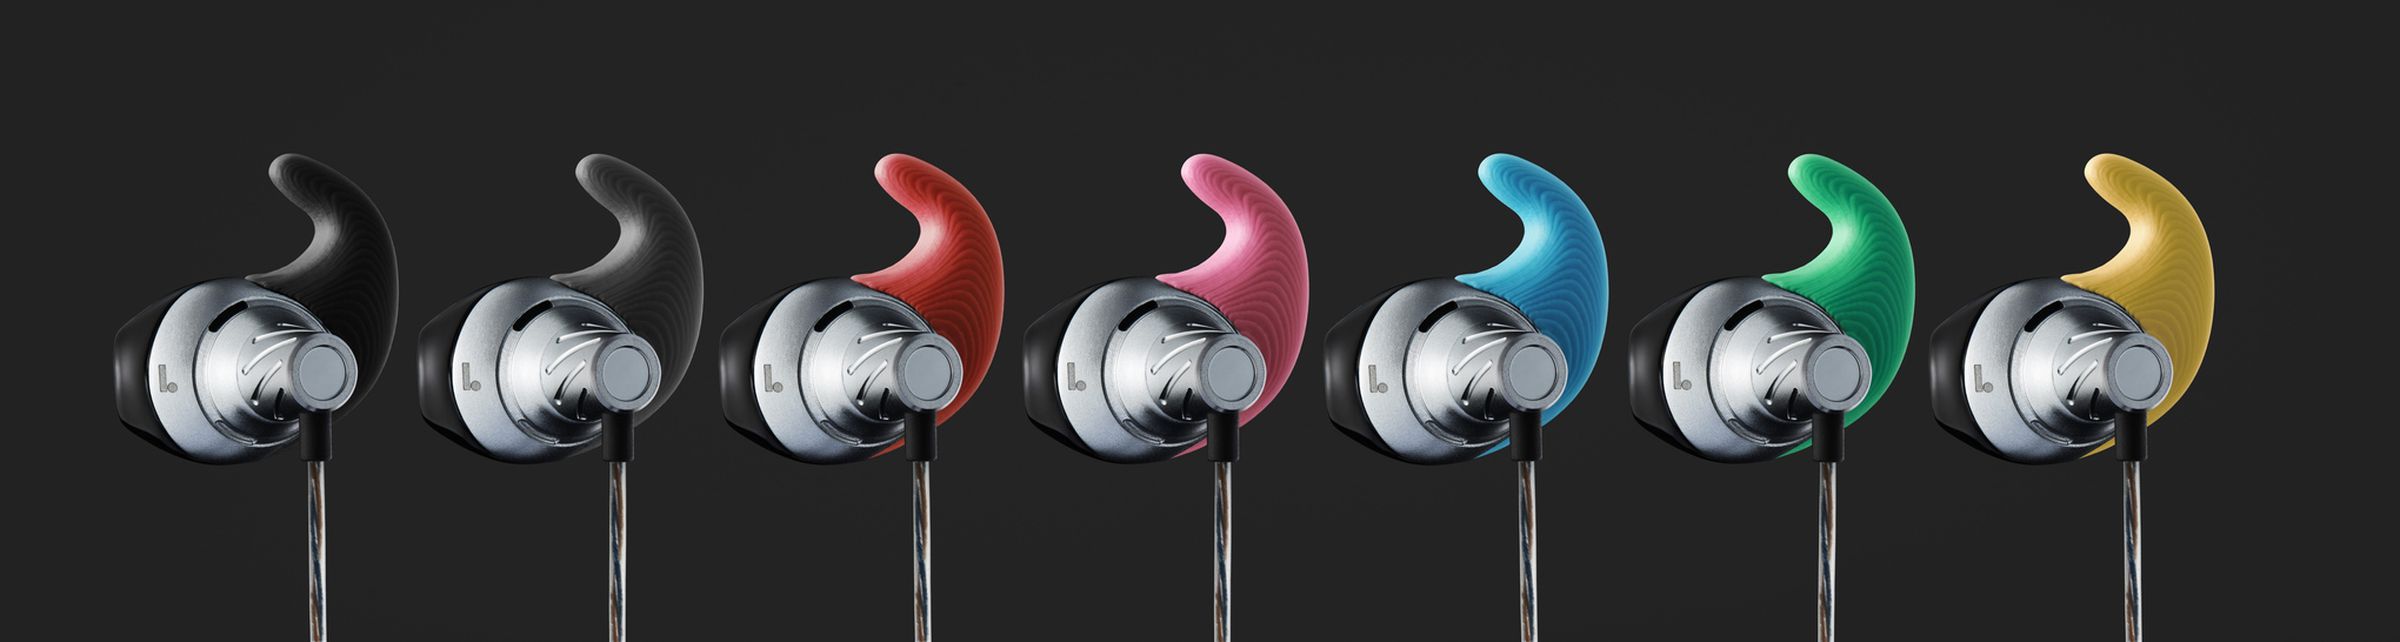 Normals earbuds images